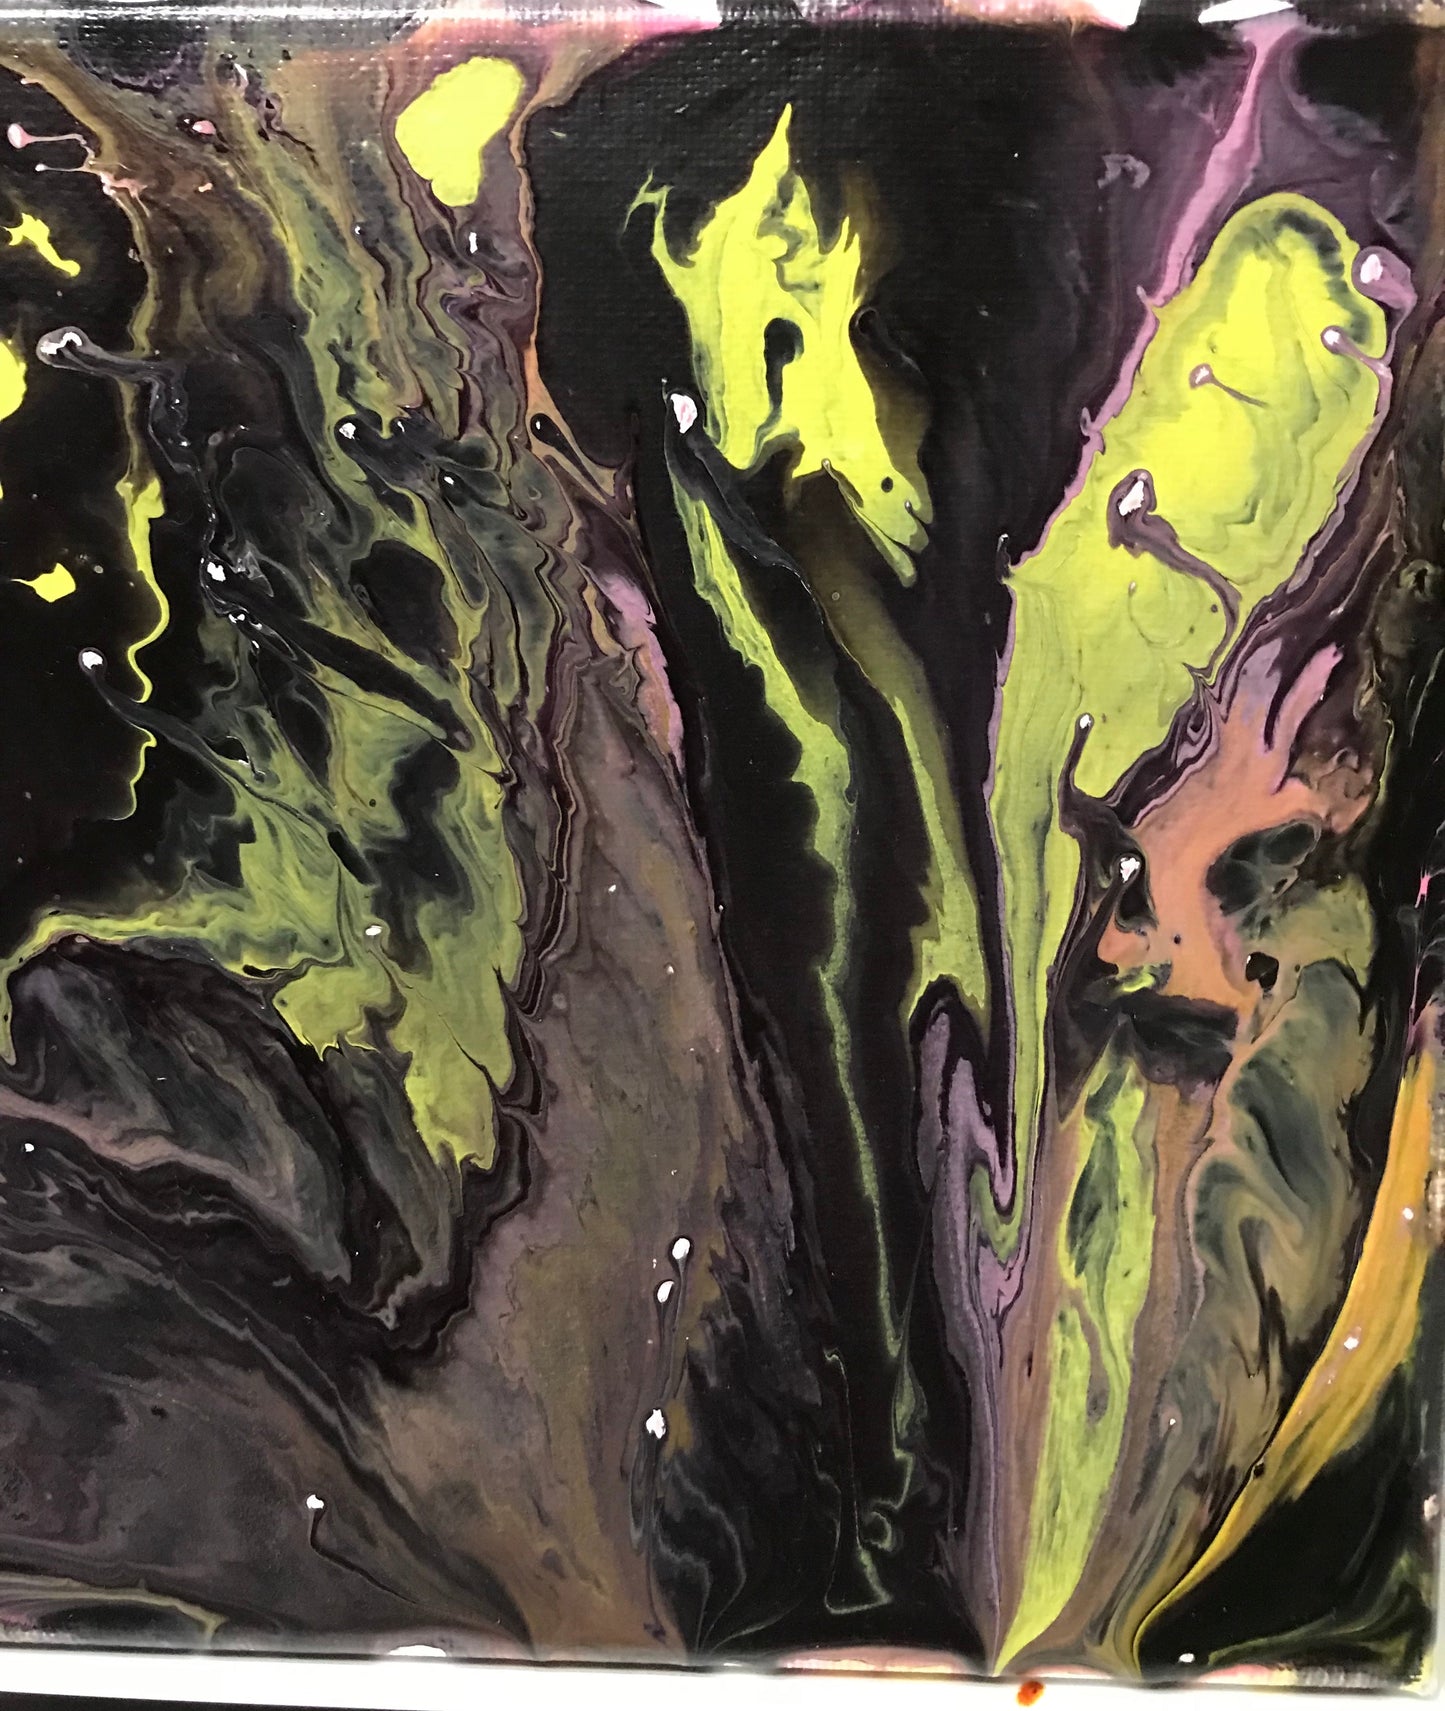 Wed, May 17th, 4-6P Kids Paint “Science & Art: Acrylic Pour” Public Painting Class